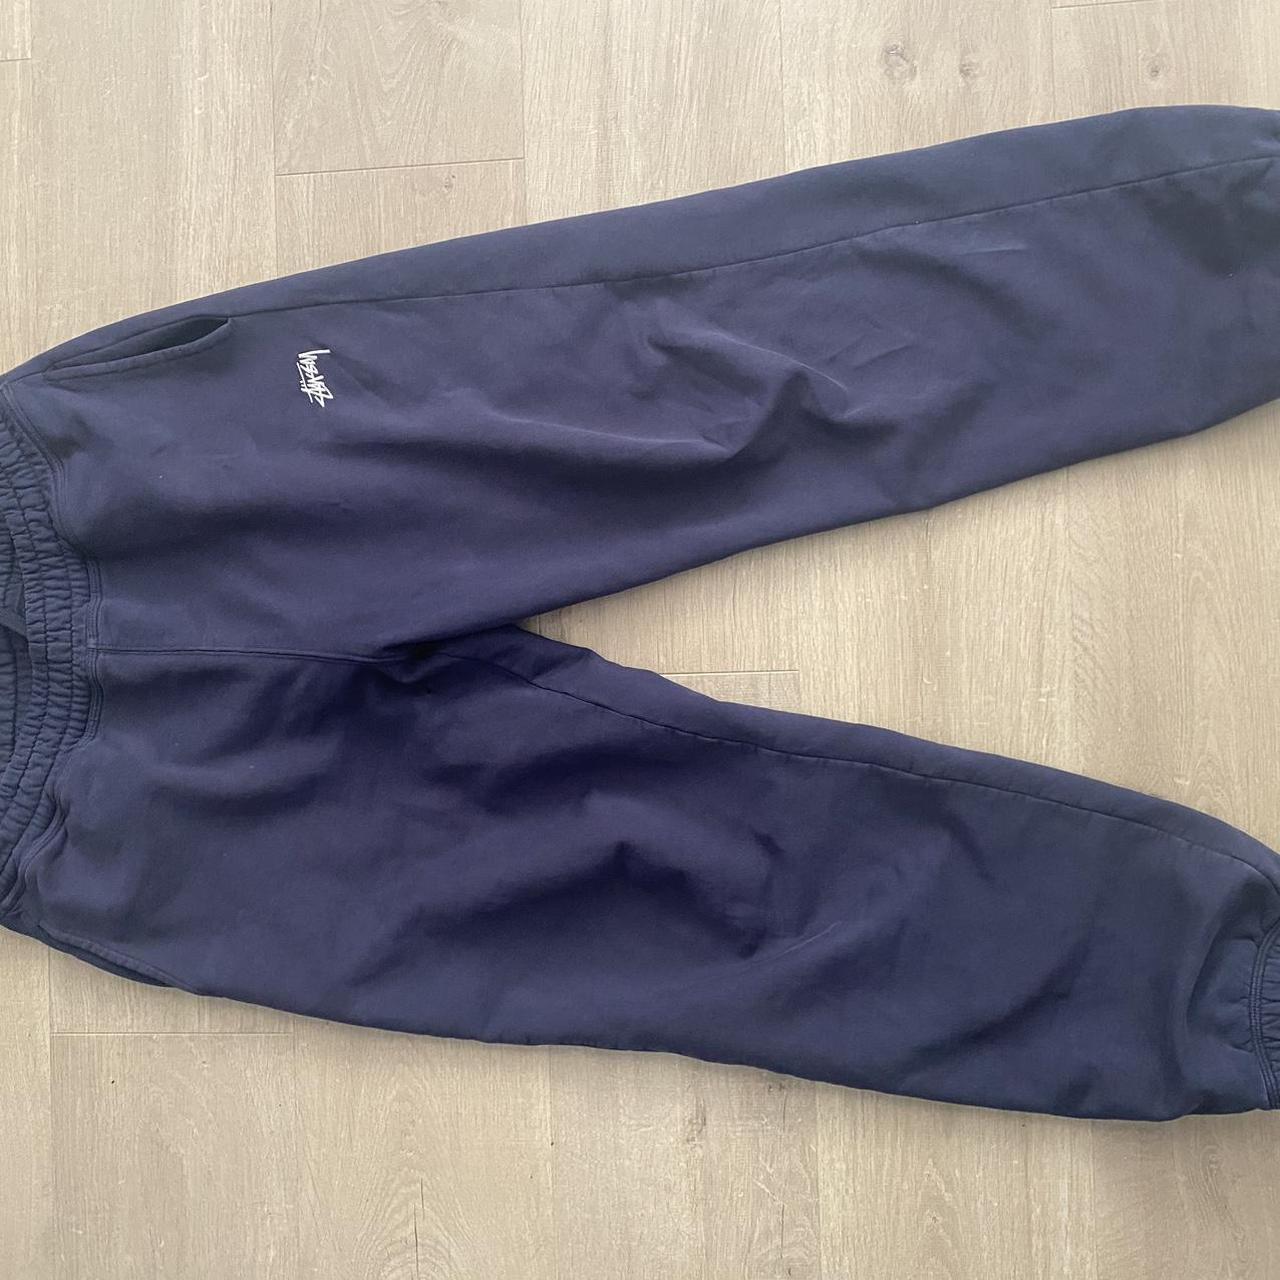 Stussy joggers Navy Used - good condition Size... - Depop